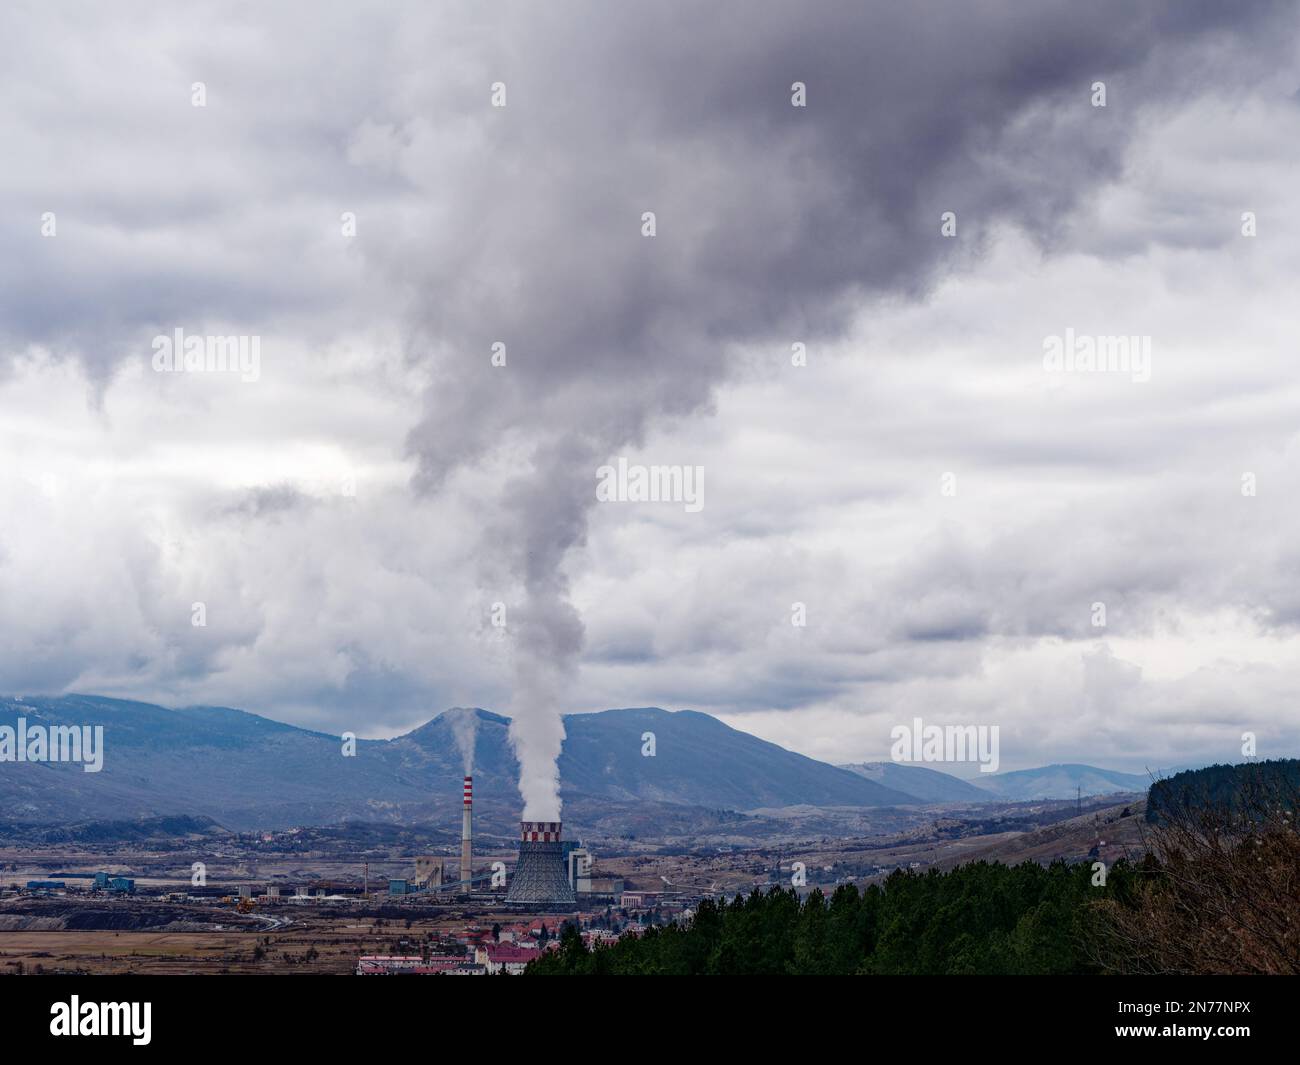 Thermal power station expelling pollutants to the air. City with poor air quality due to thermal power plant. Burning fossil fuel. Toxic air. Stock Photo